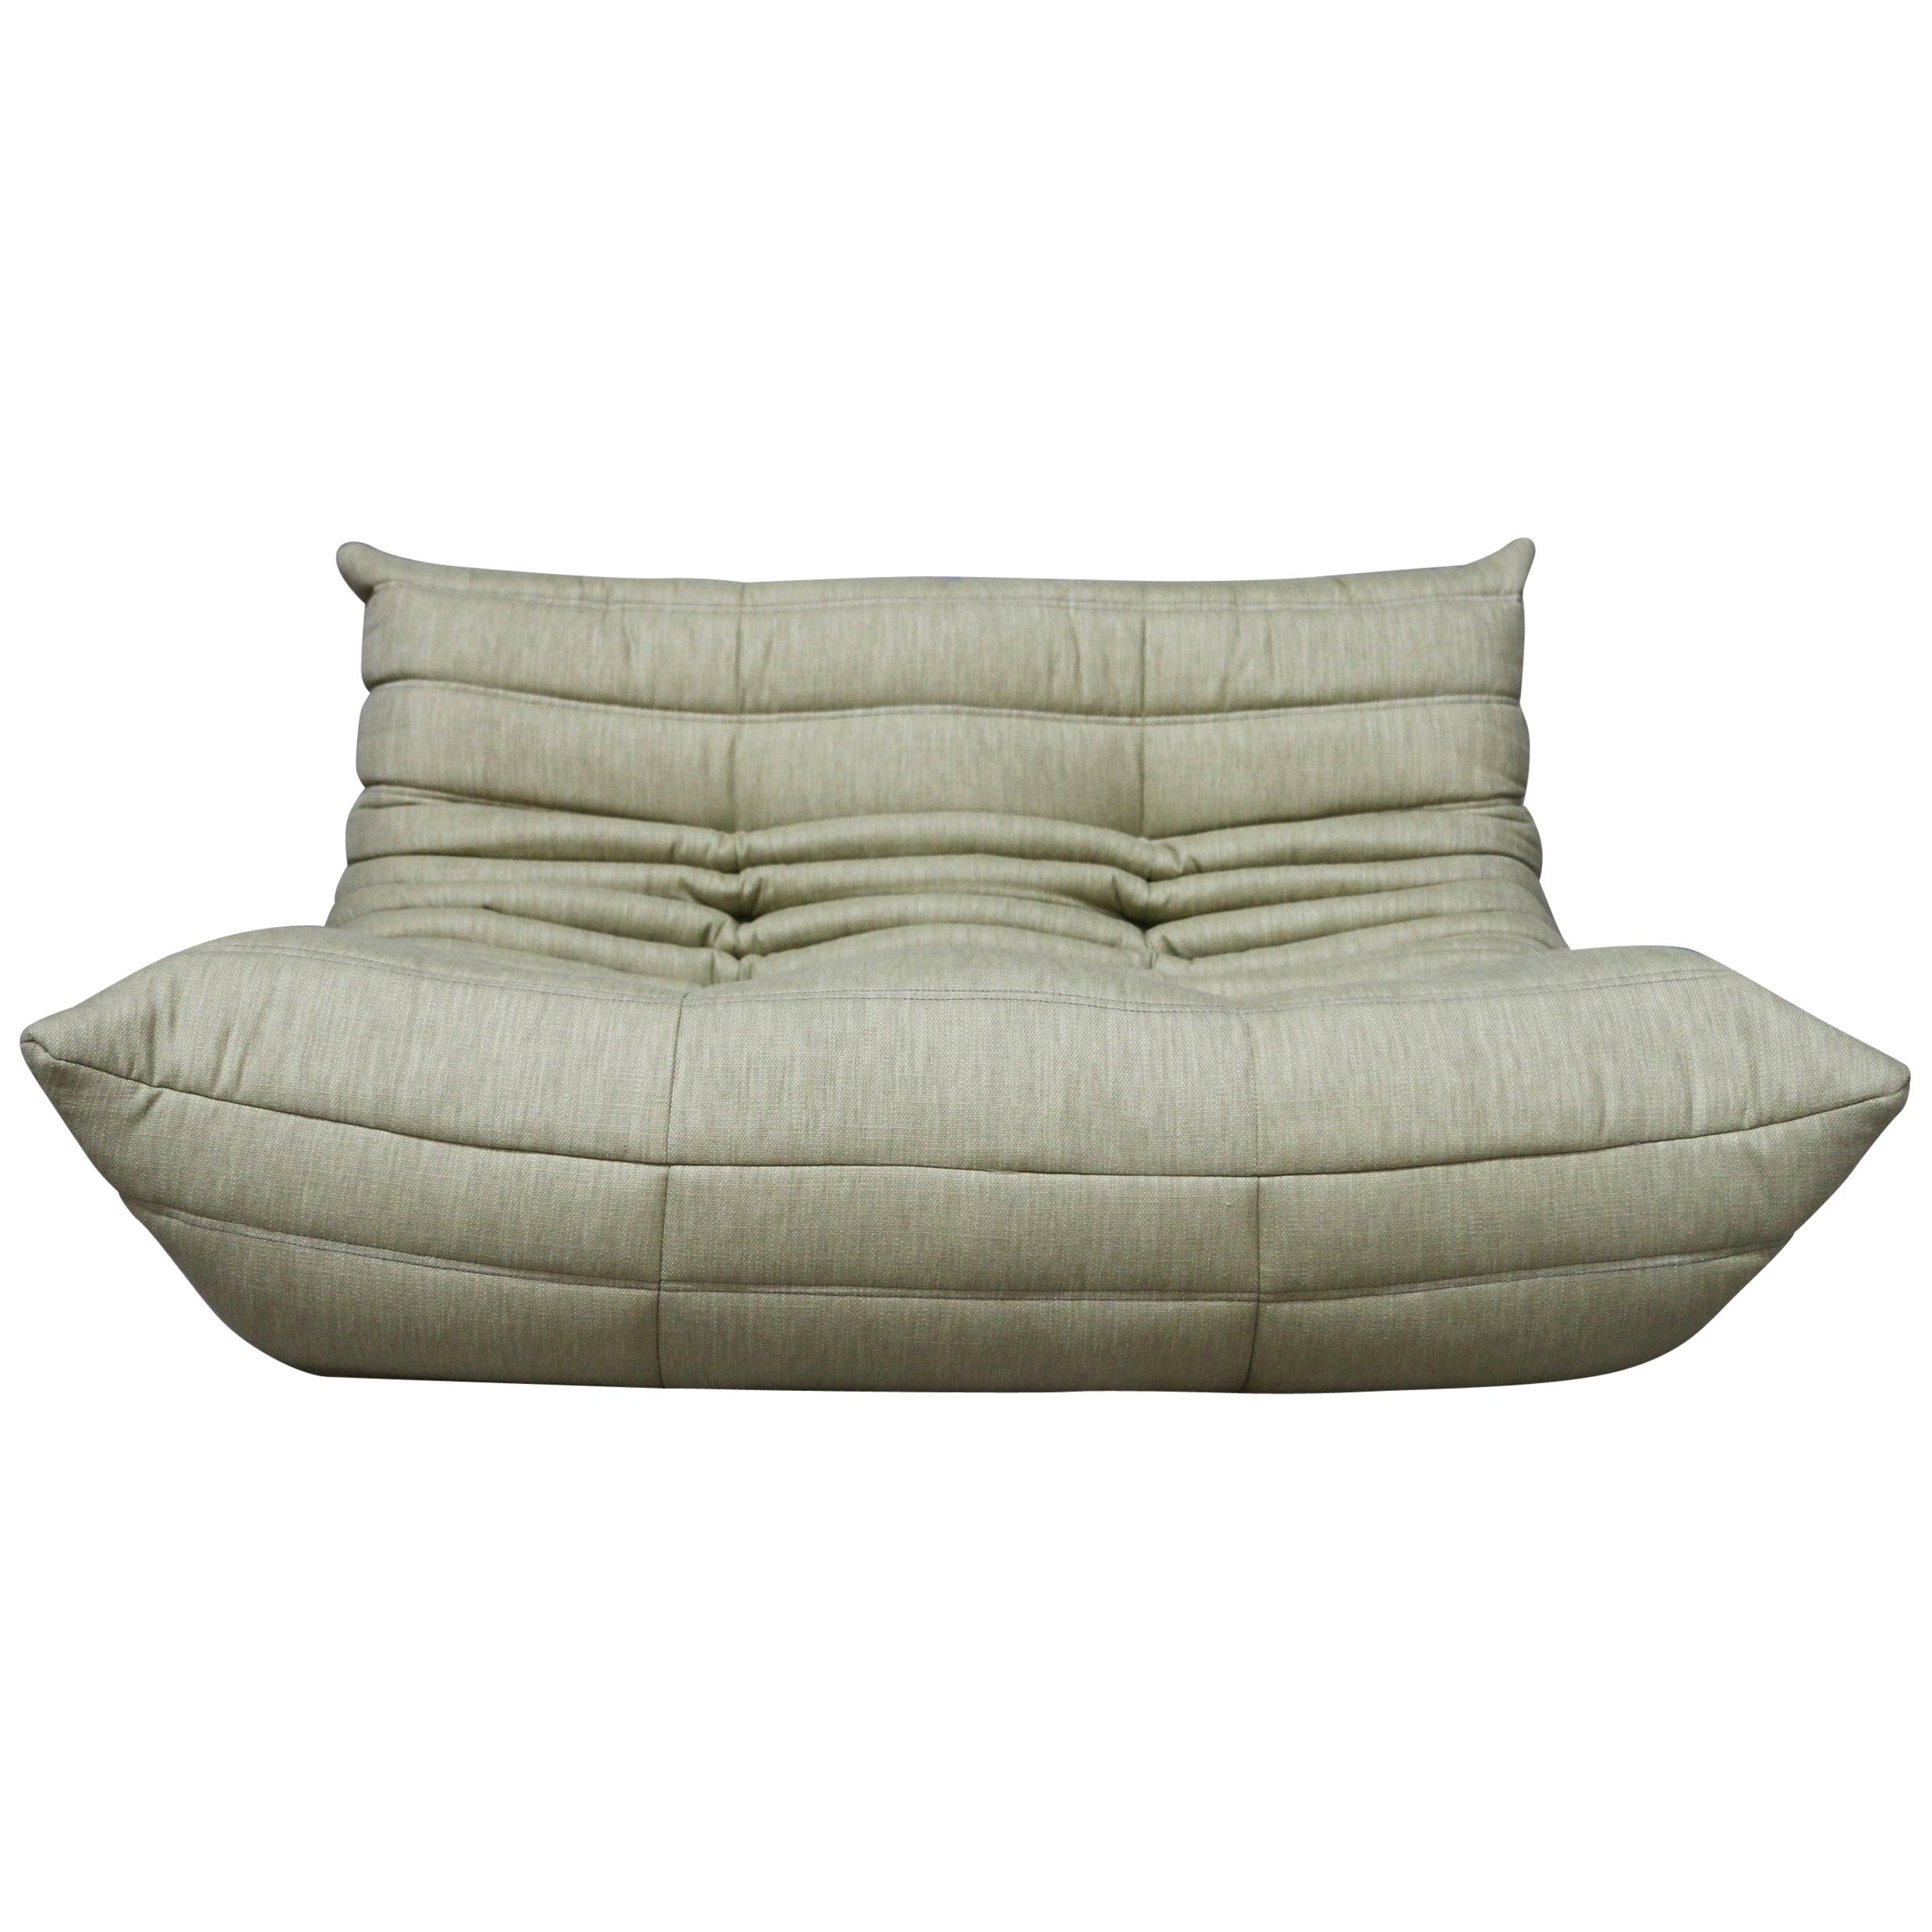 CERTIFIED Ligne Roset TOGO Loveseat in Stain Free Olive Fabric, DIAMOND QUALITY For Sale